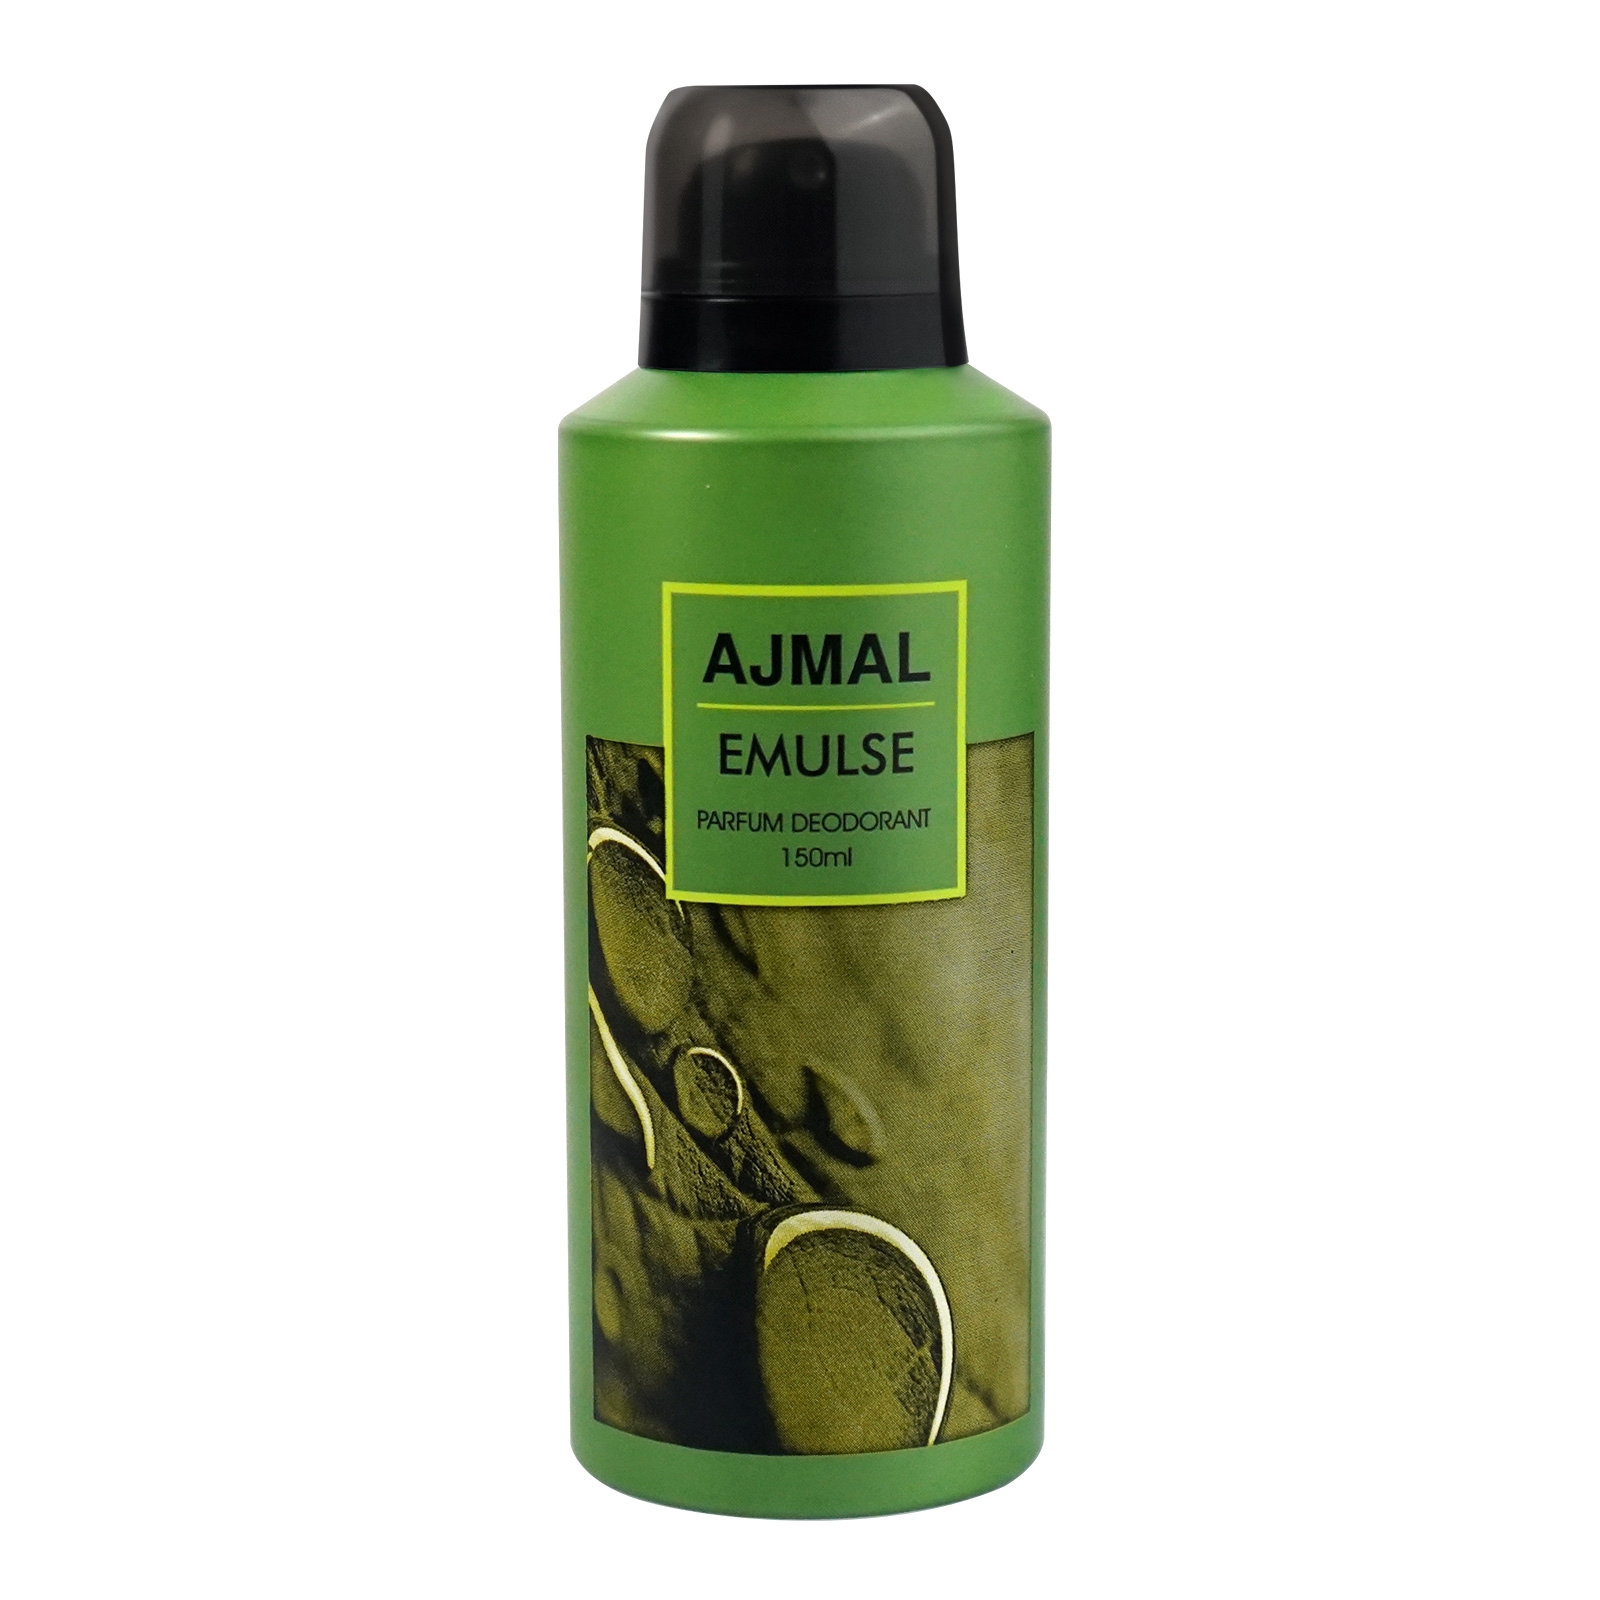 Ajmal | Ajmal Emulse Deodorant Floral Perfume 150ML Long Lasting Scent Spray Party Wear Gift For Men and Women.